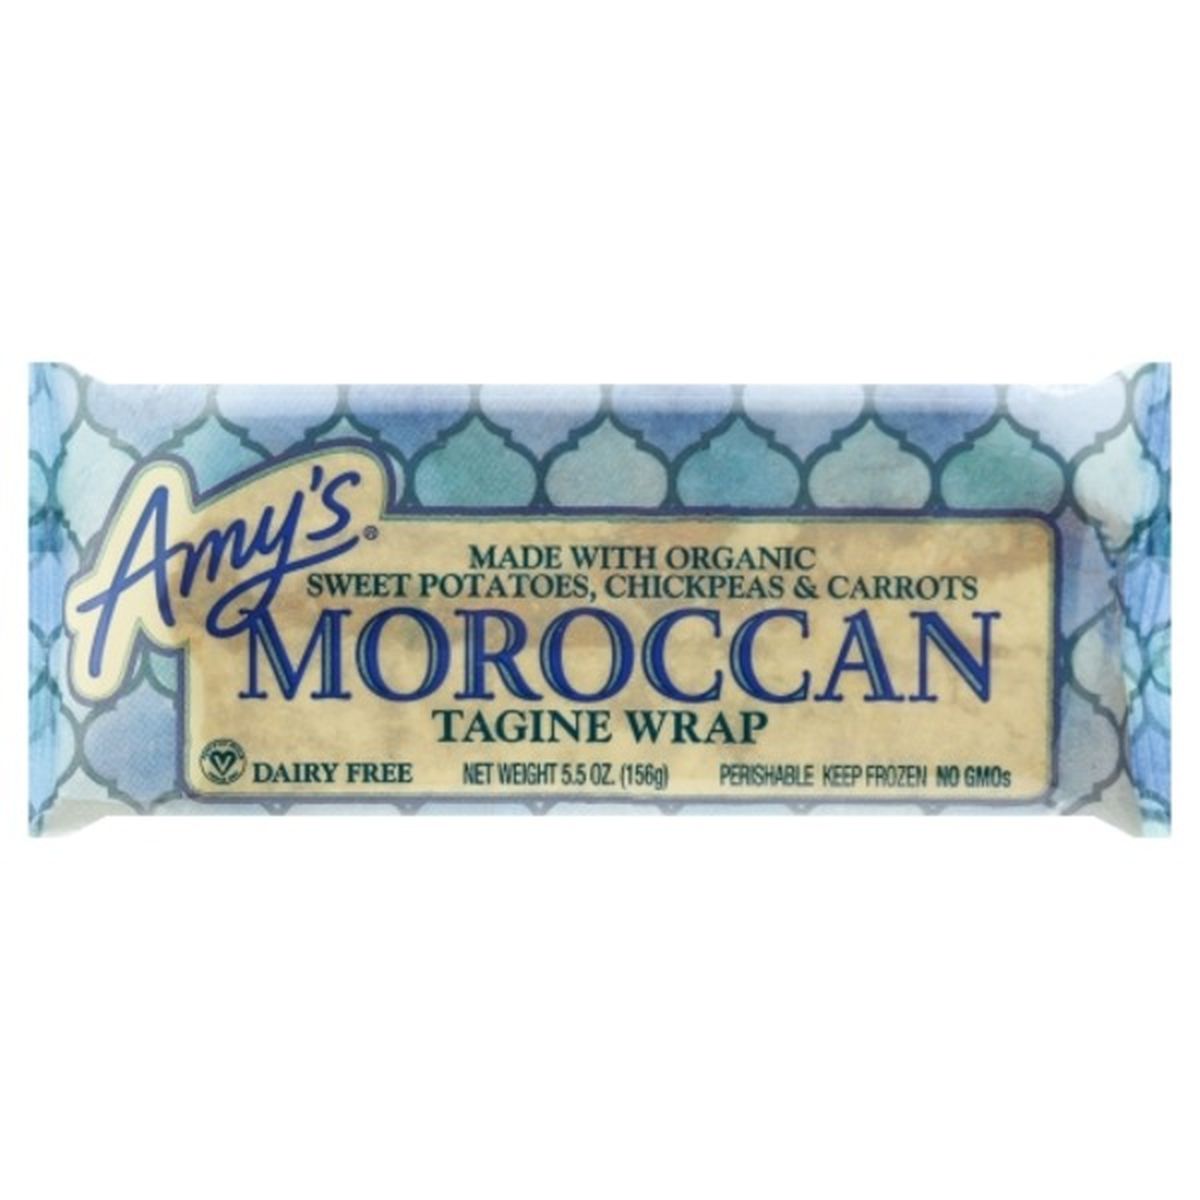 Calories in Amy's Kitchen Tagine Wrap, Moroccan